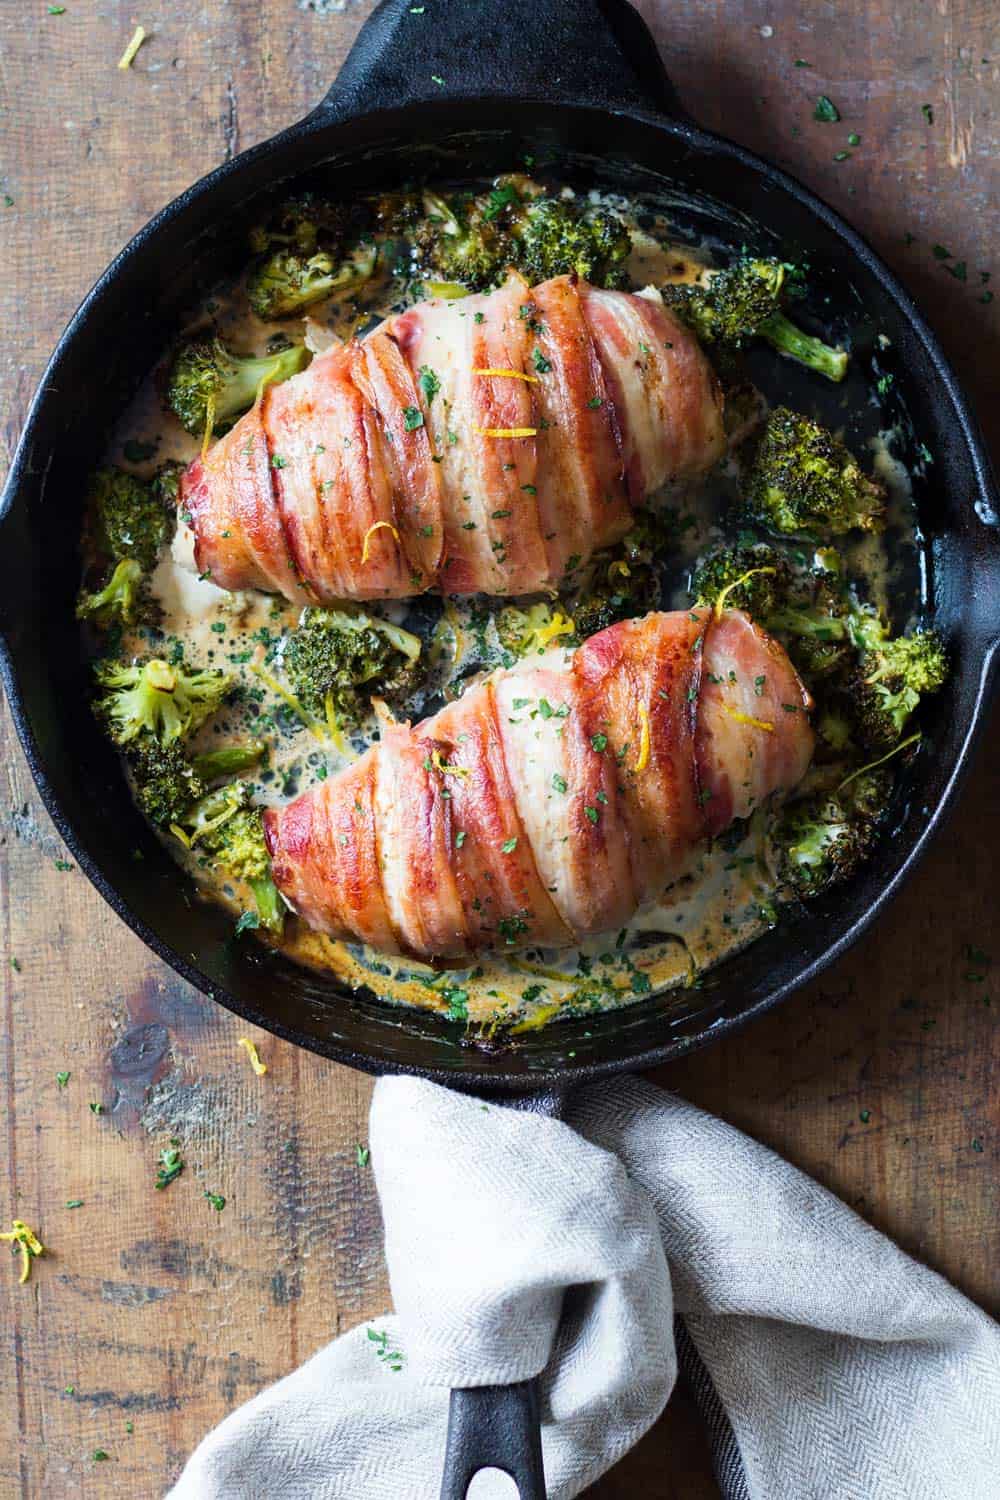 Top down view of baked bacon-wrapped chicken breast in black pan with broccoli